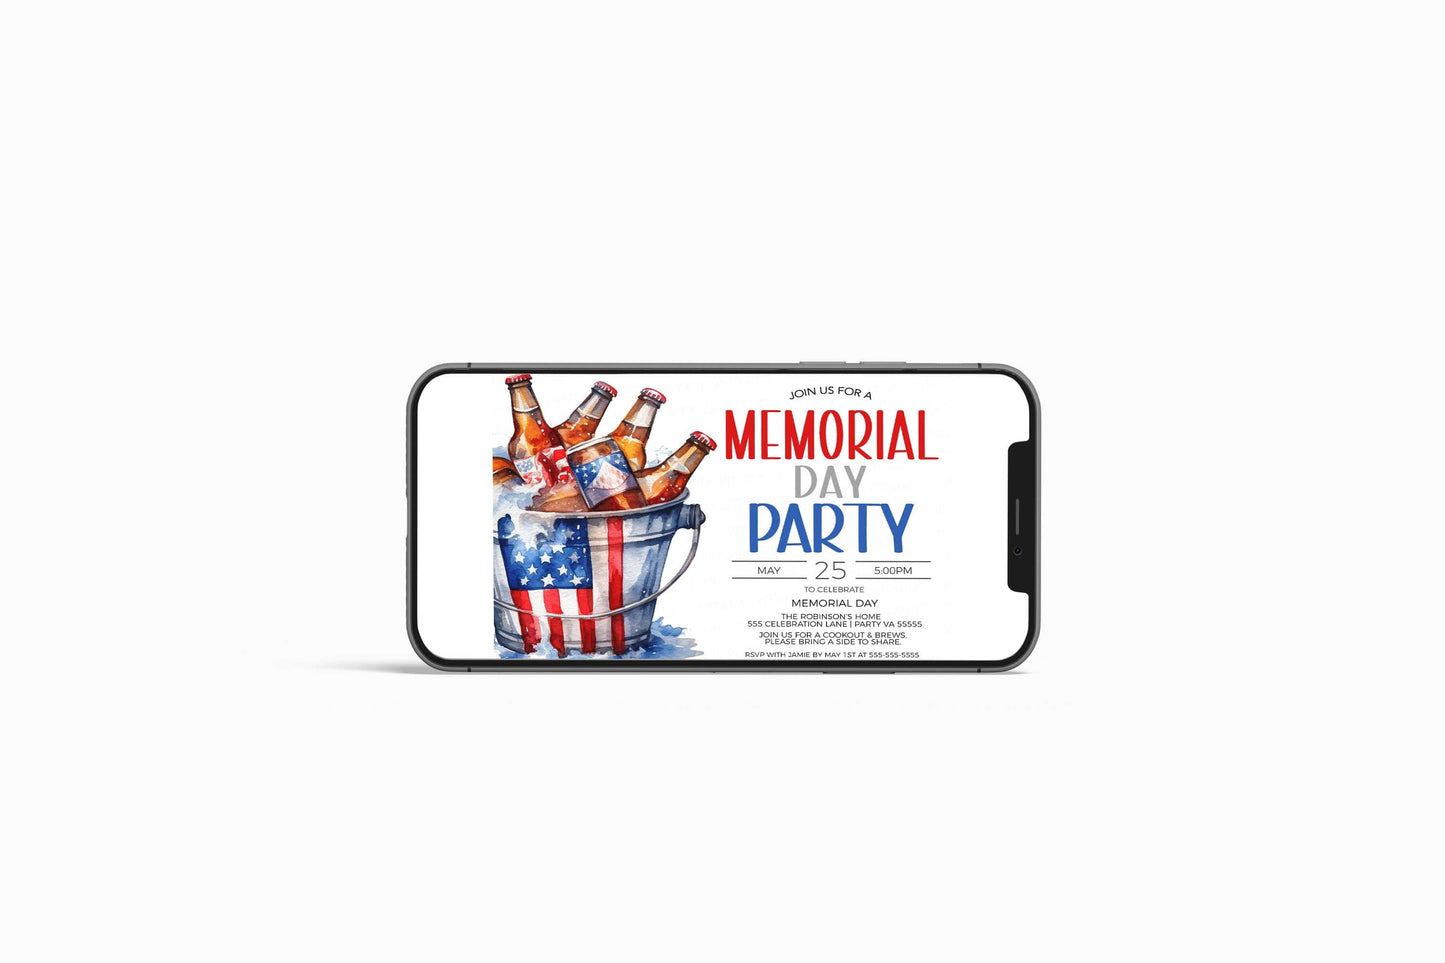 Memorial Day Party Invitation, Memorial Day Invite, Memorial Day Cookout, Burgers & Beer, Brunch Lunch Dinner, Editable Printable Template